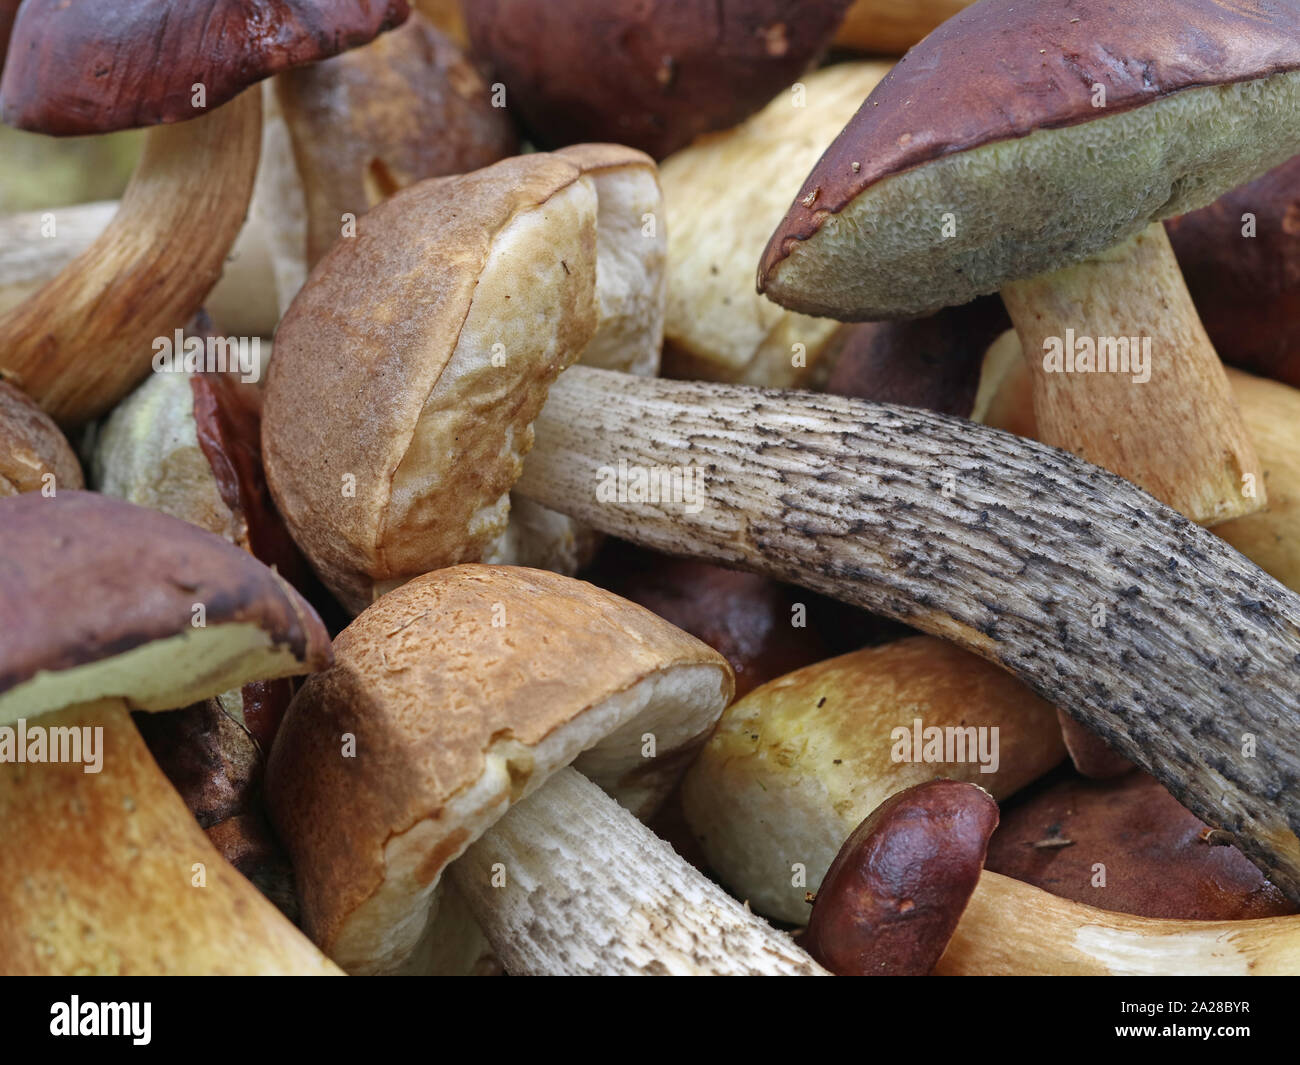 close up of fresh collected mushrooms from the bavarian forest, gathering wild mushrooms background Stock Photo